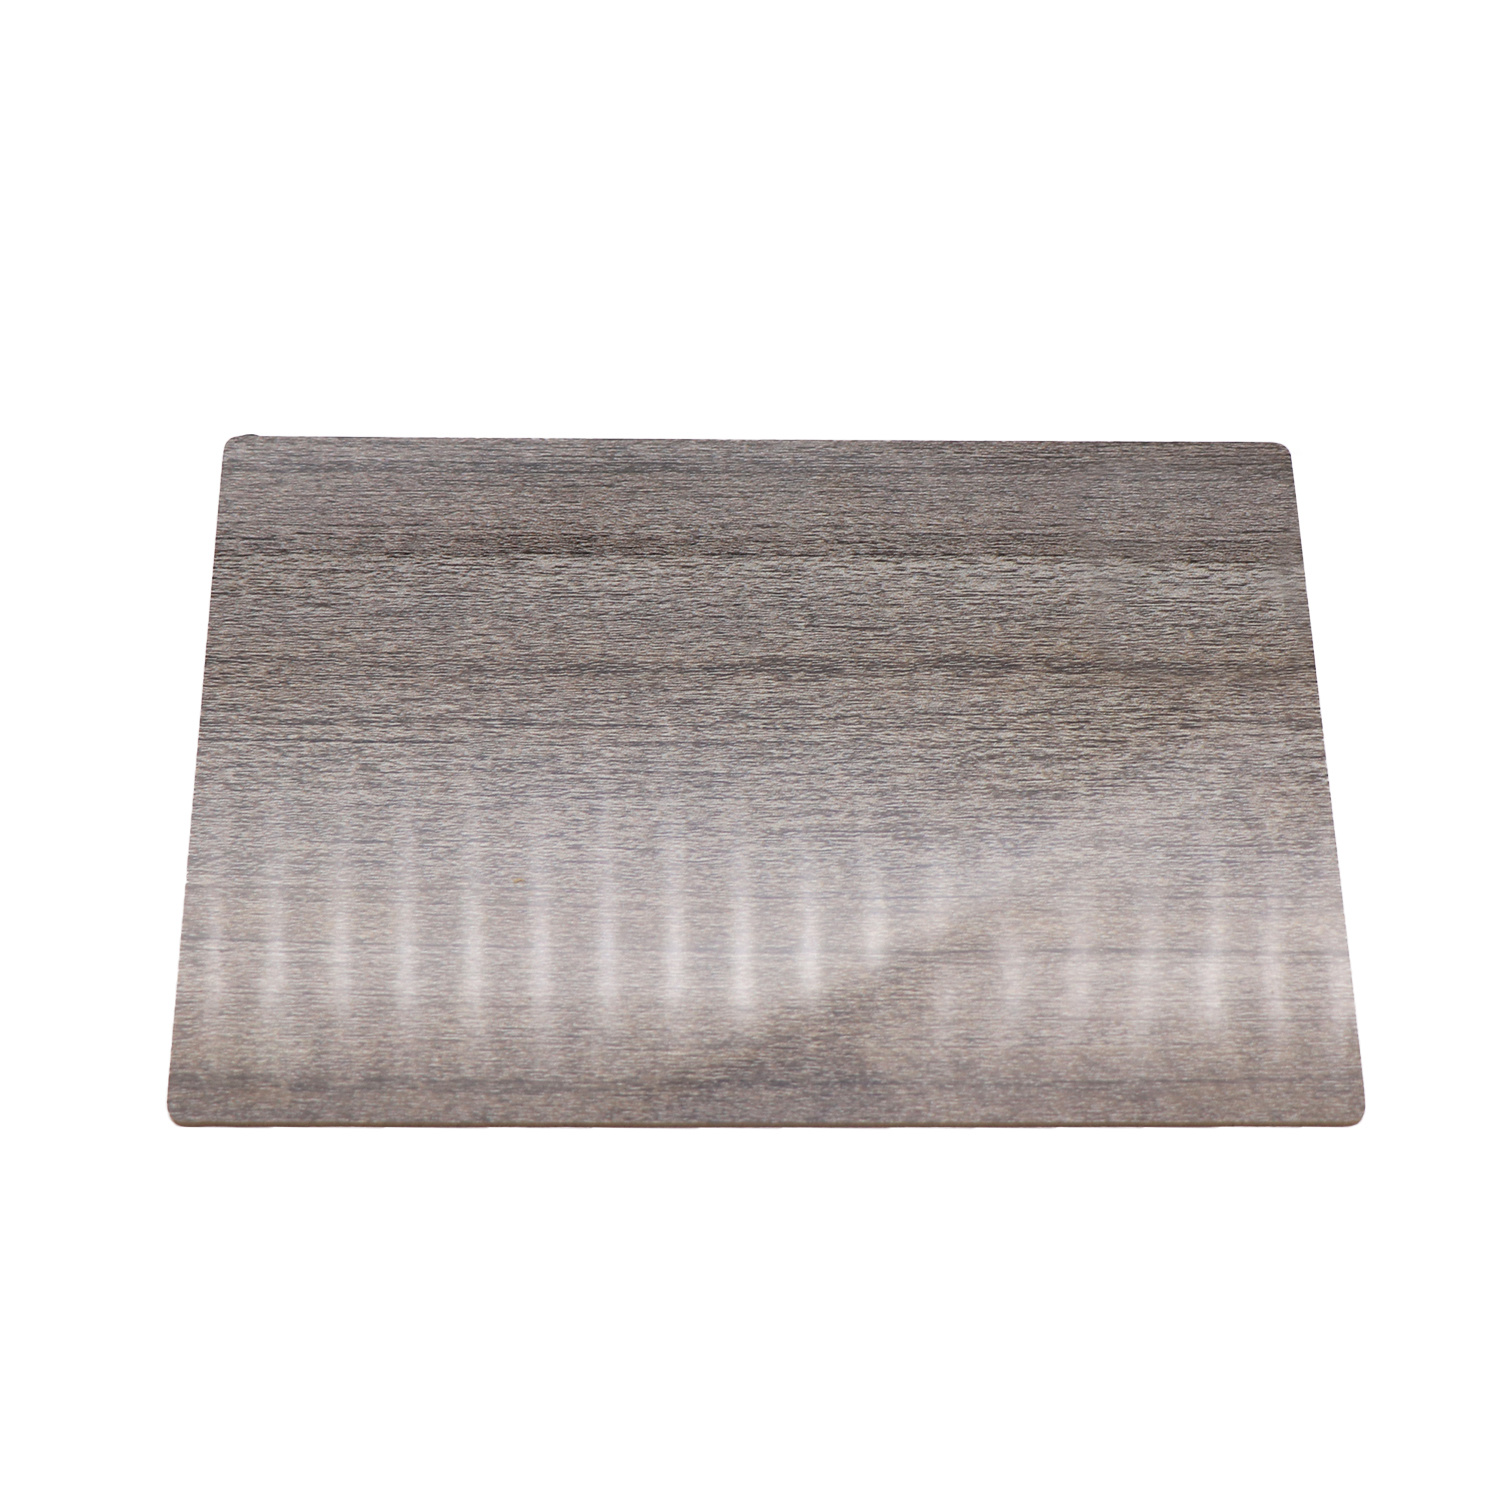 Melamine Laminated MDF with Fashion Colors for Building Material and Furniture